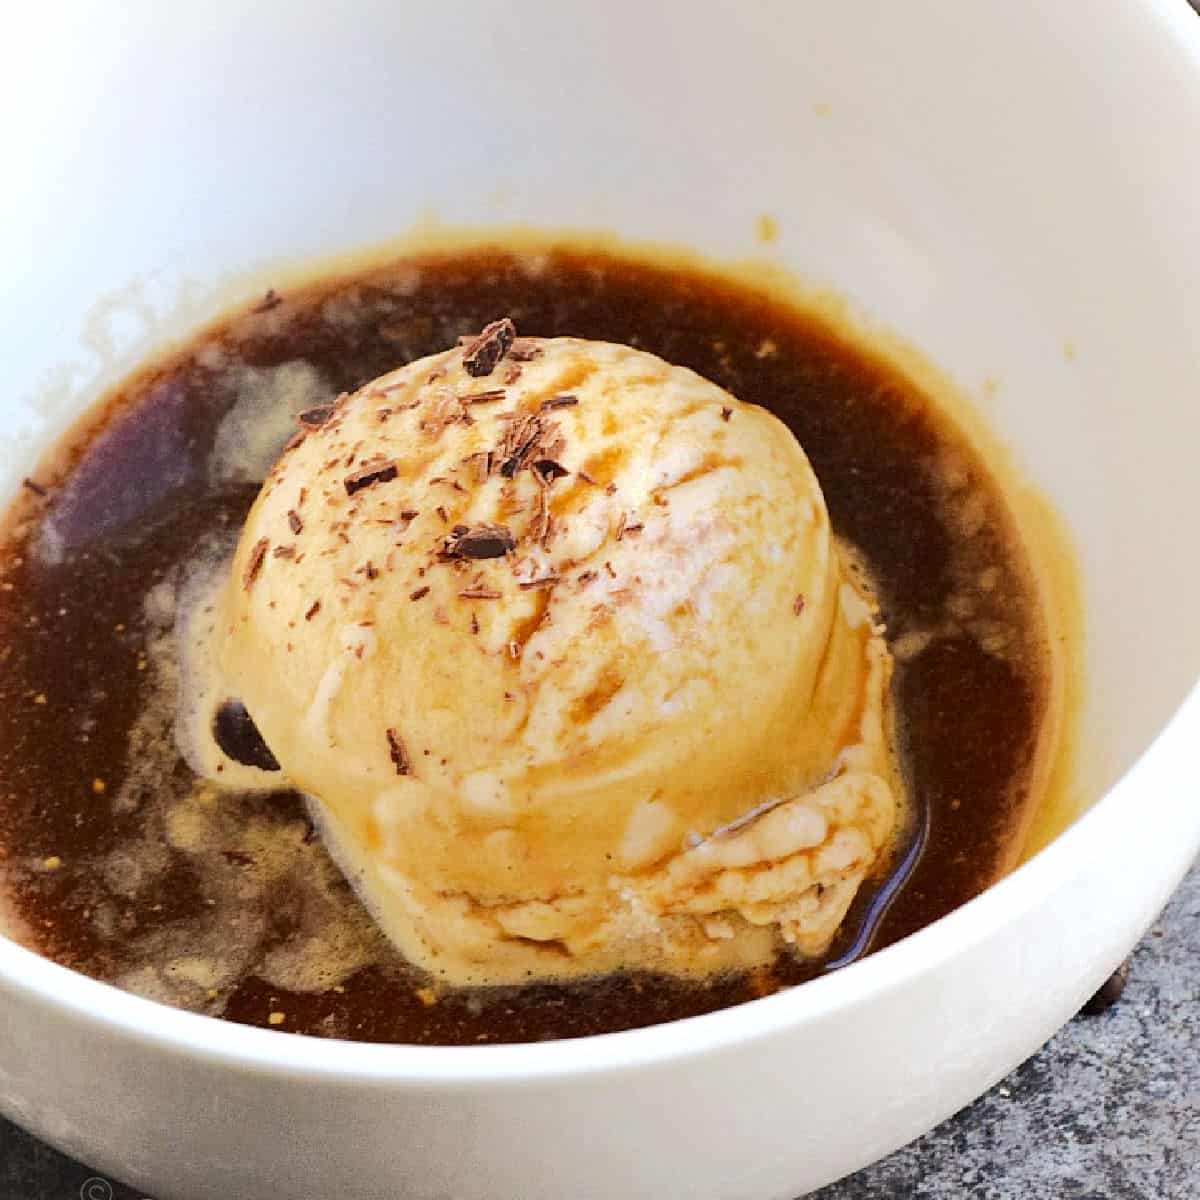 A scoop of ice cream in a white bowl topped with espresso and chocolate shavings.